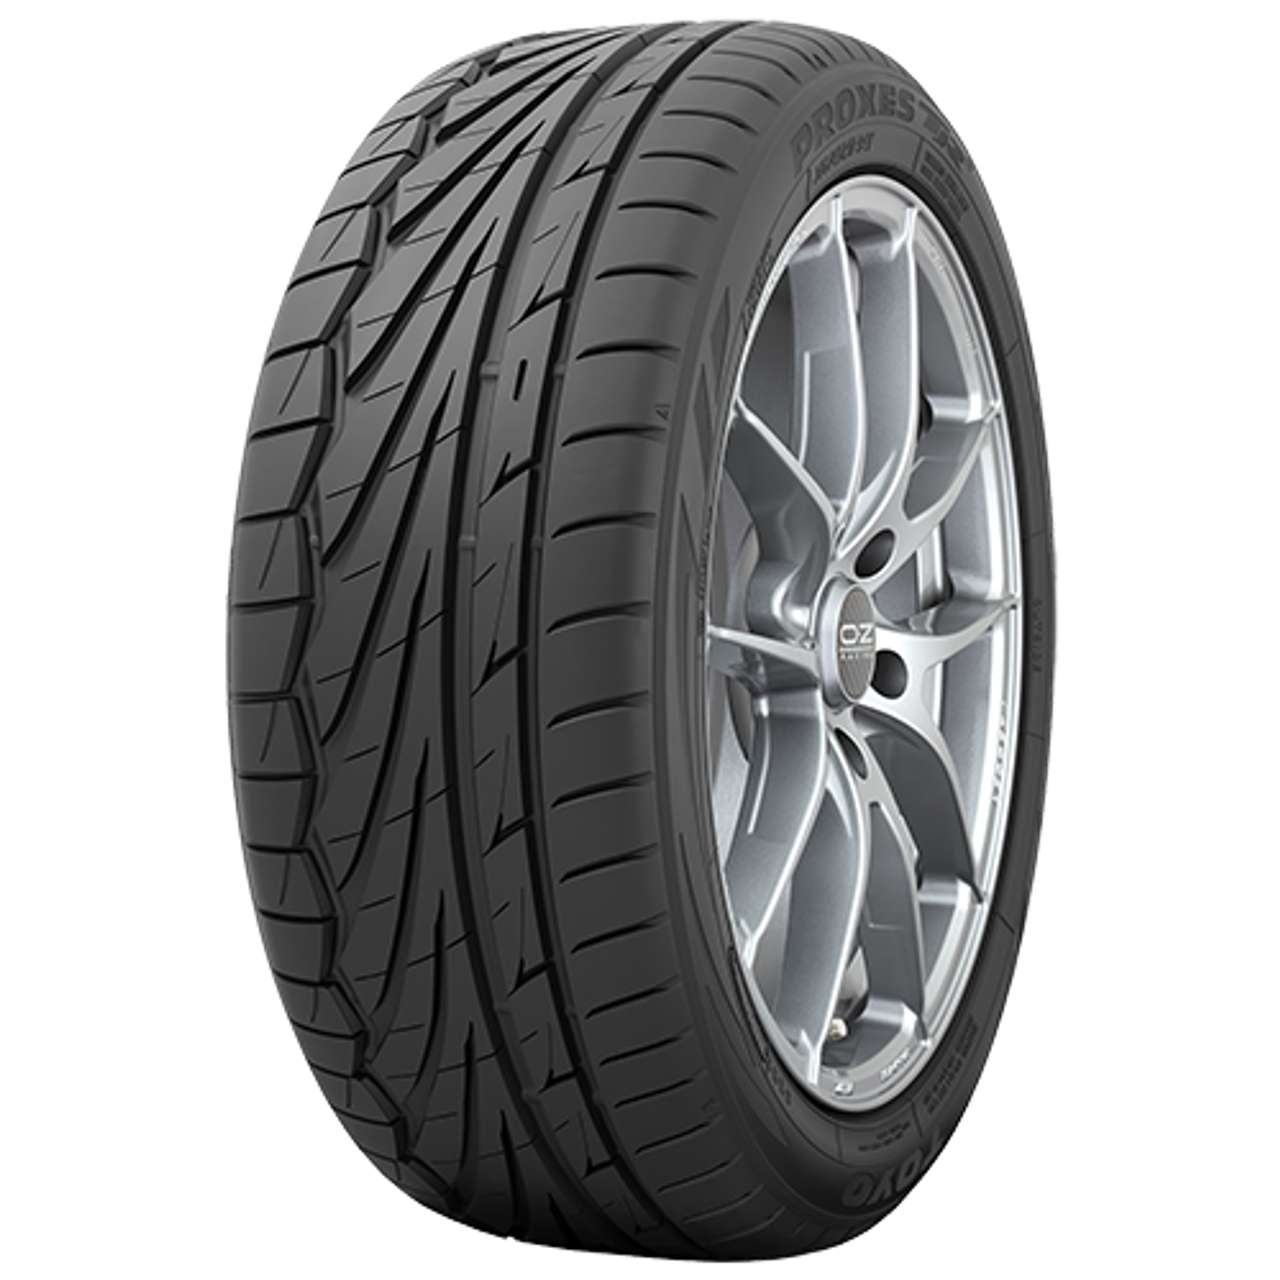 TOYO PROXES TR1 205/55R16 91W BSW